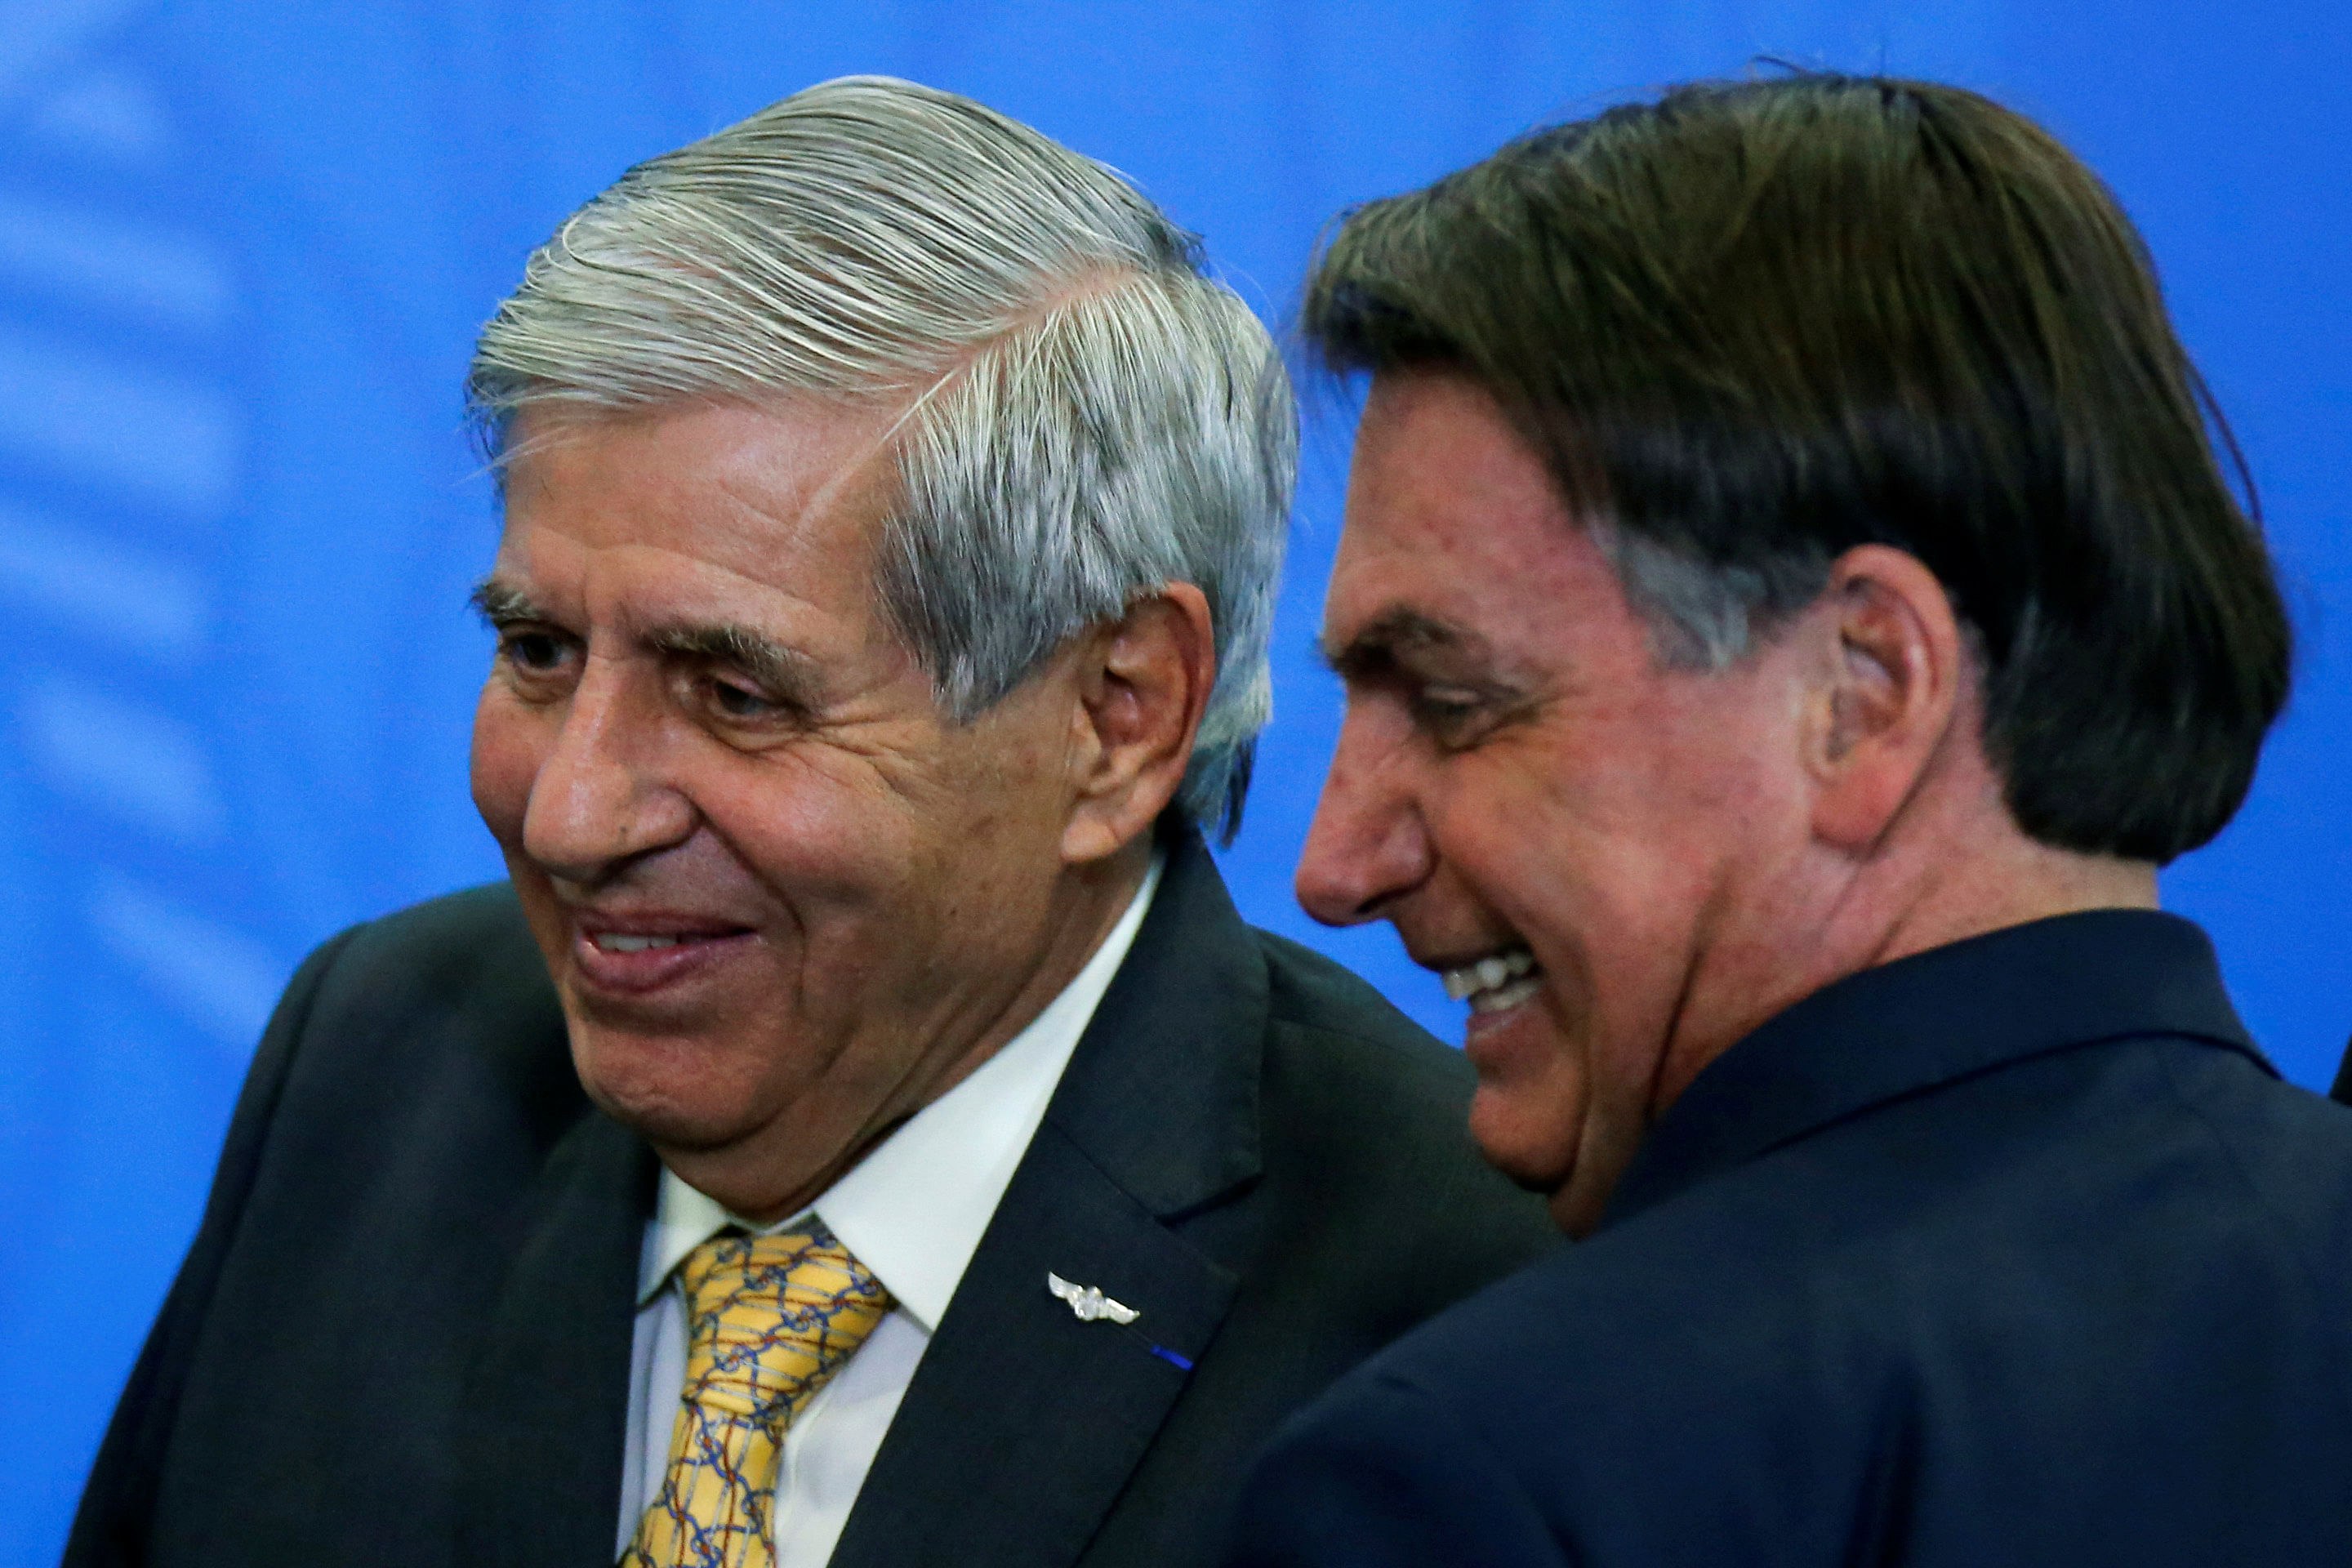 Brazil's Minister of Institutional Security Augusto Heleno (L) reacts next to Brazil's President Jair Bolsonaro. (Reuters file photo)